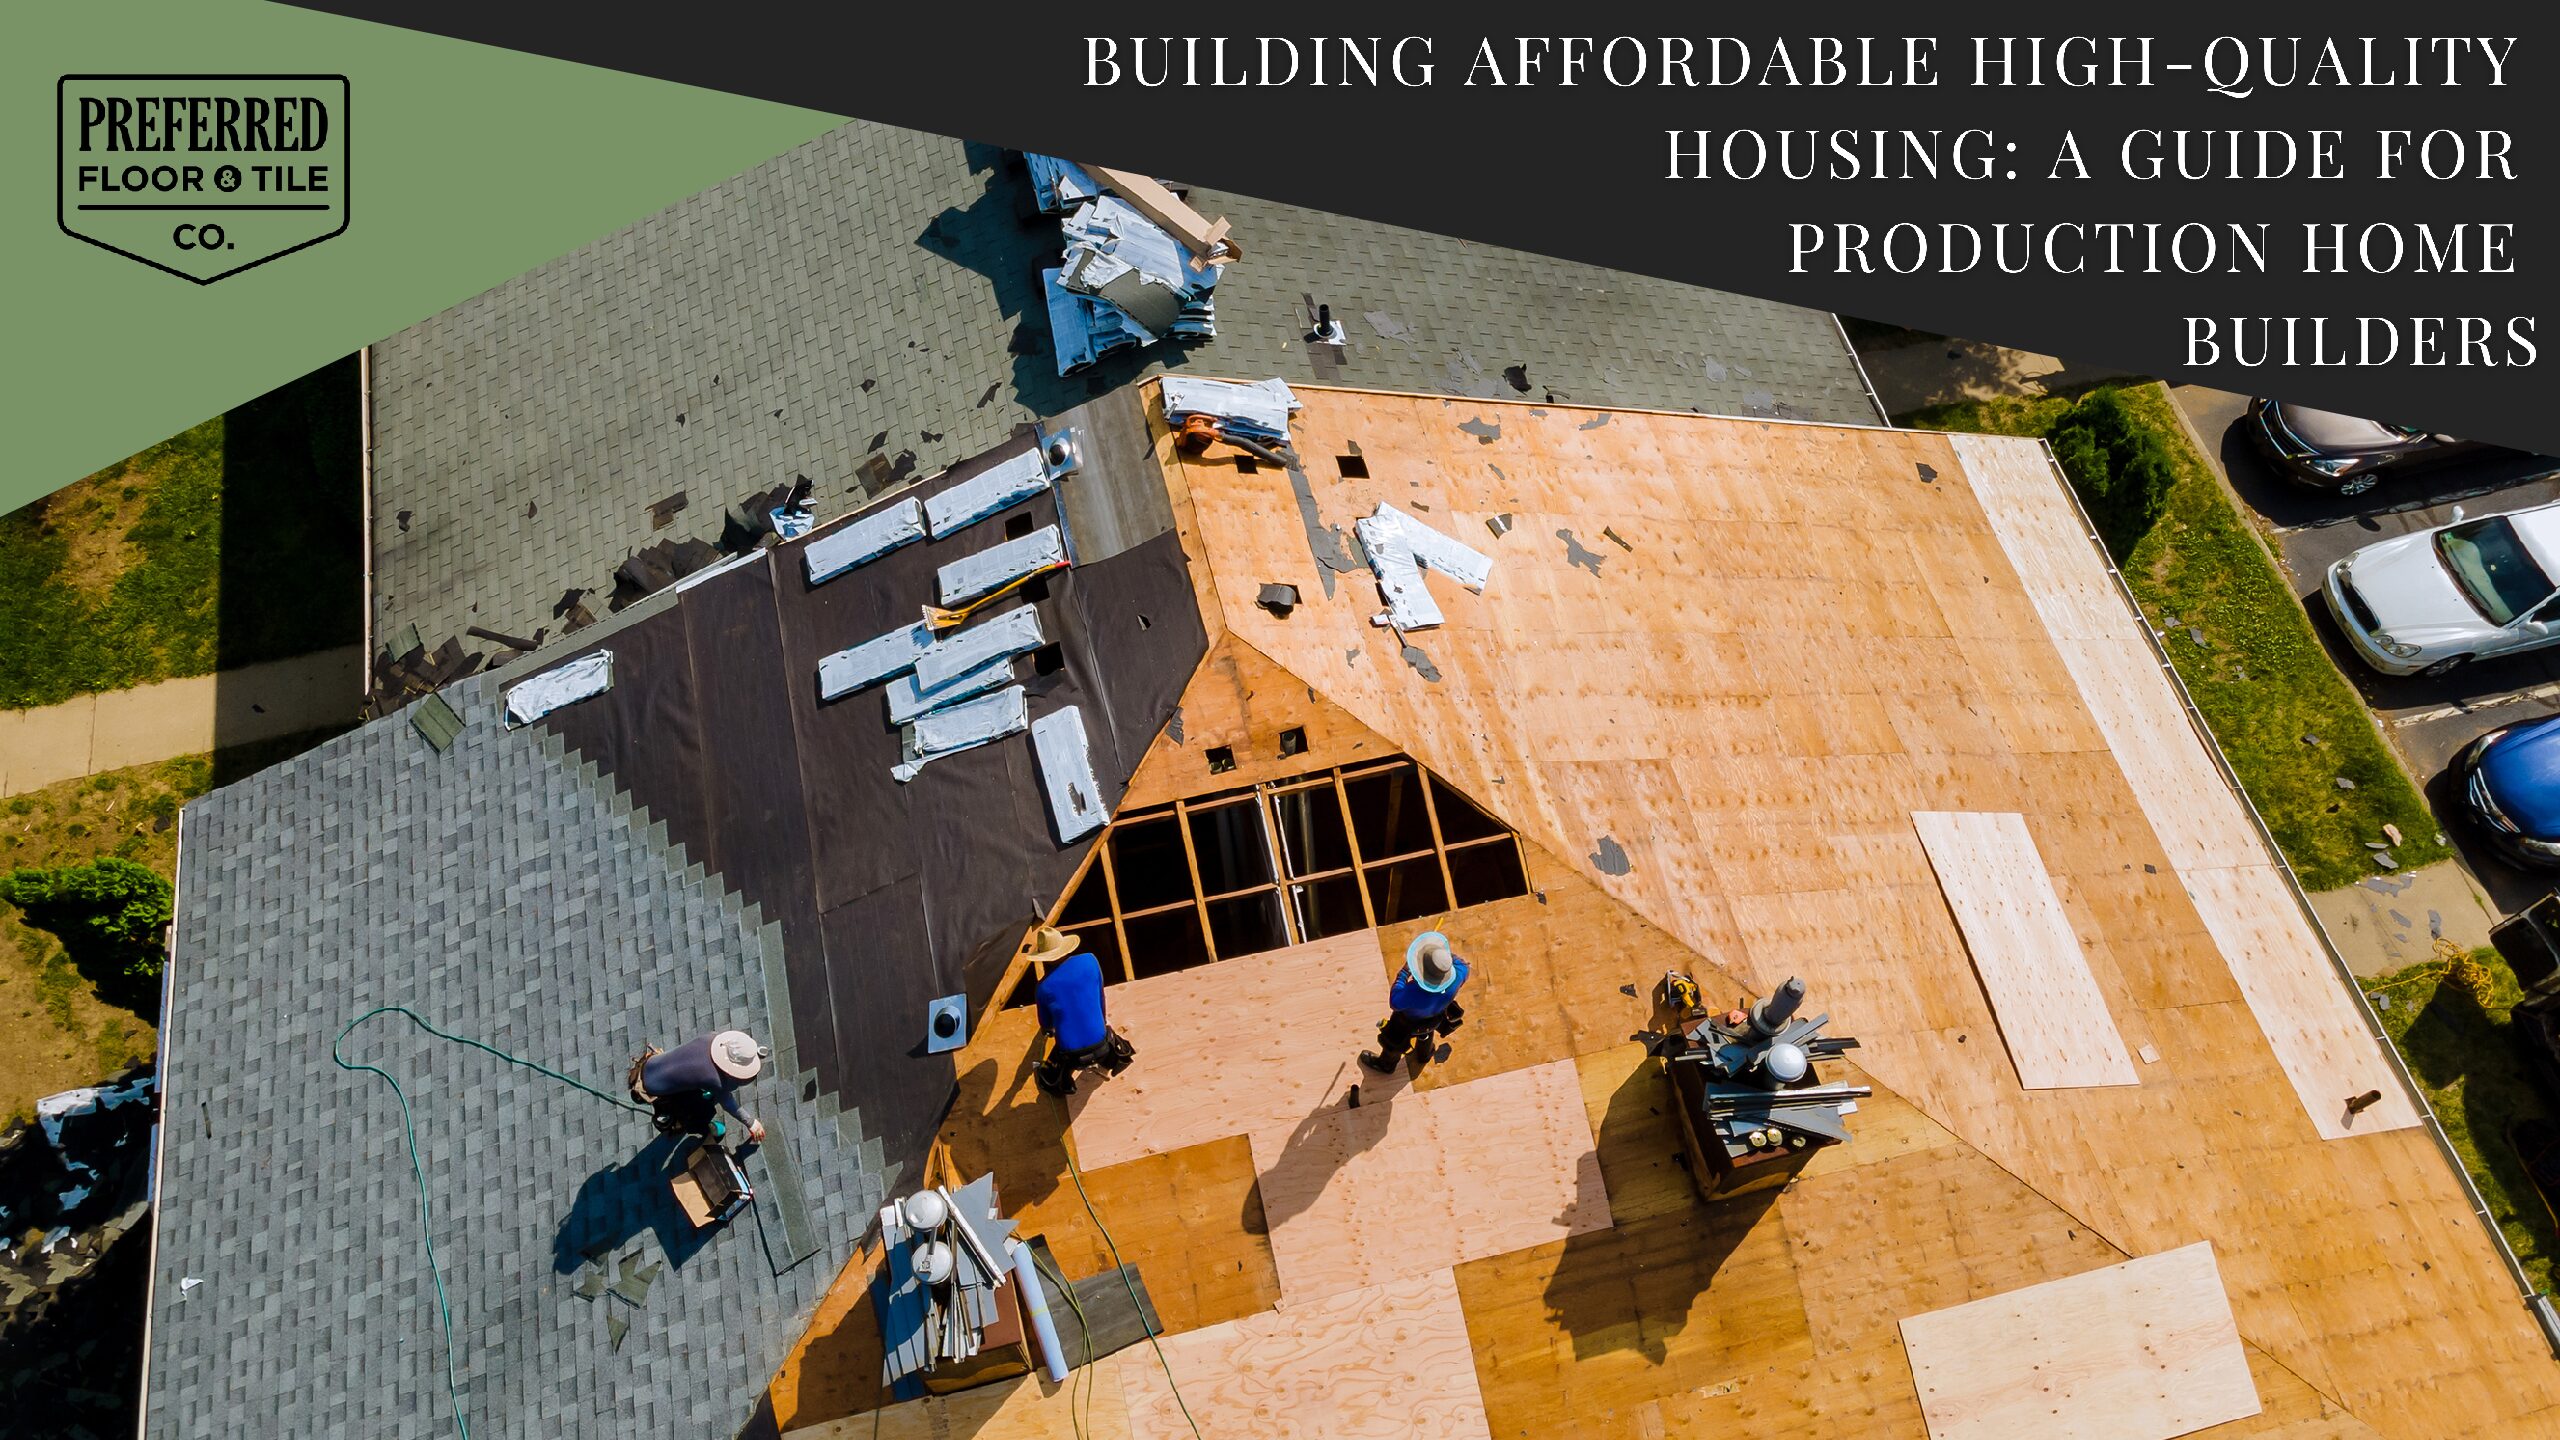 Building Affordable High-Quality Housing: A Guide for Production Home Builders